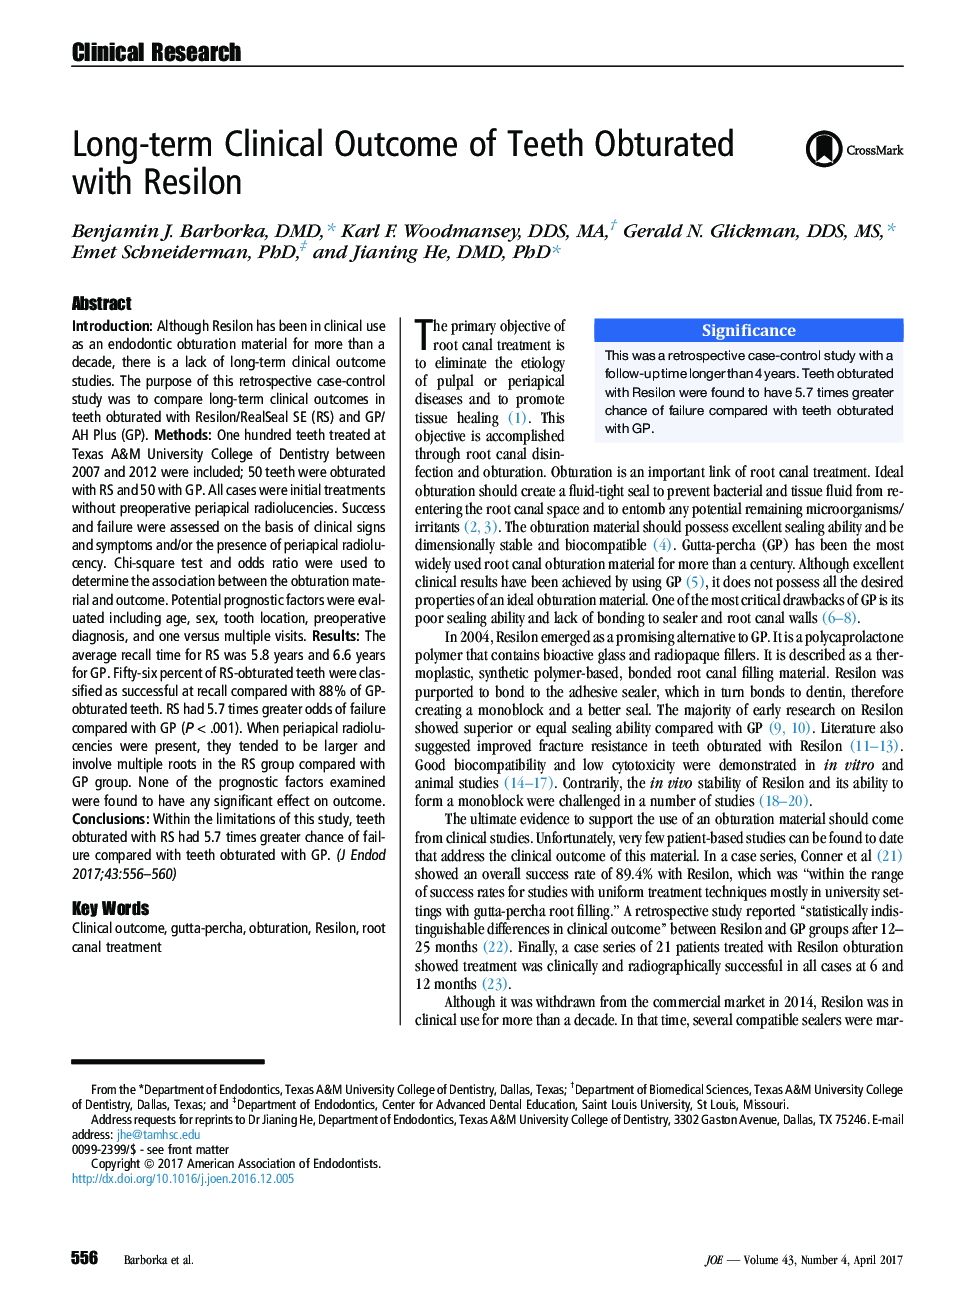 Long-term Clinical Outcome of Teeth Obturated with Resilon